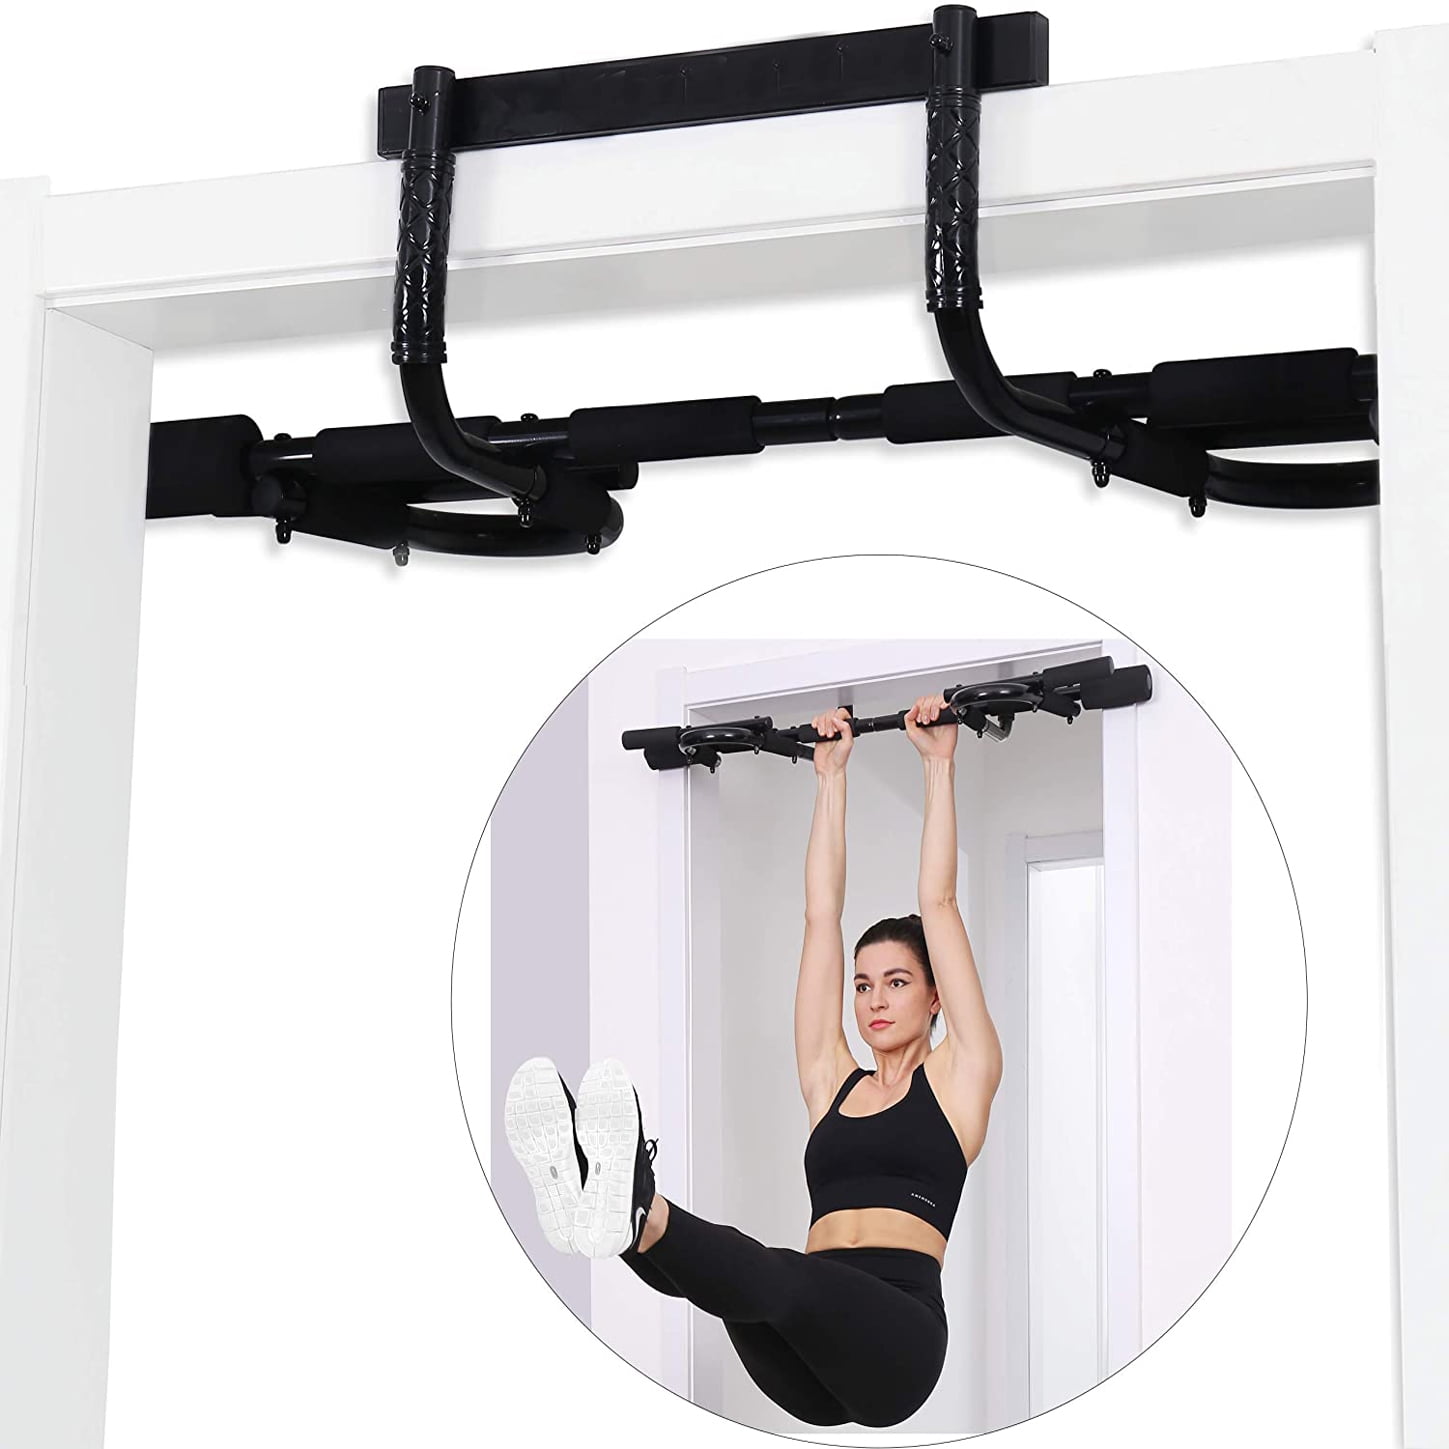 Pull up Bar Clamp Doorway Multi Home Gym Chin up bar Foldable Portable Indoor Thick, Heavy Duty Hook Bar, Padded drilling/No damage for Frame - Walmart.com